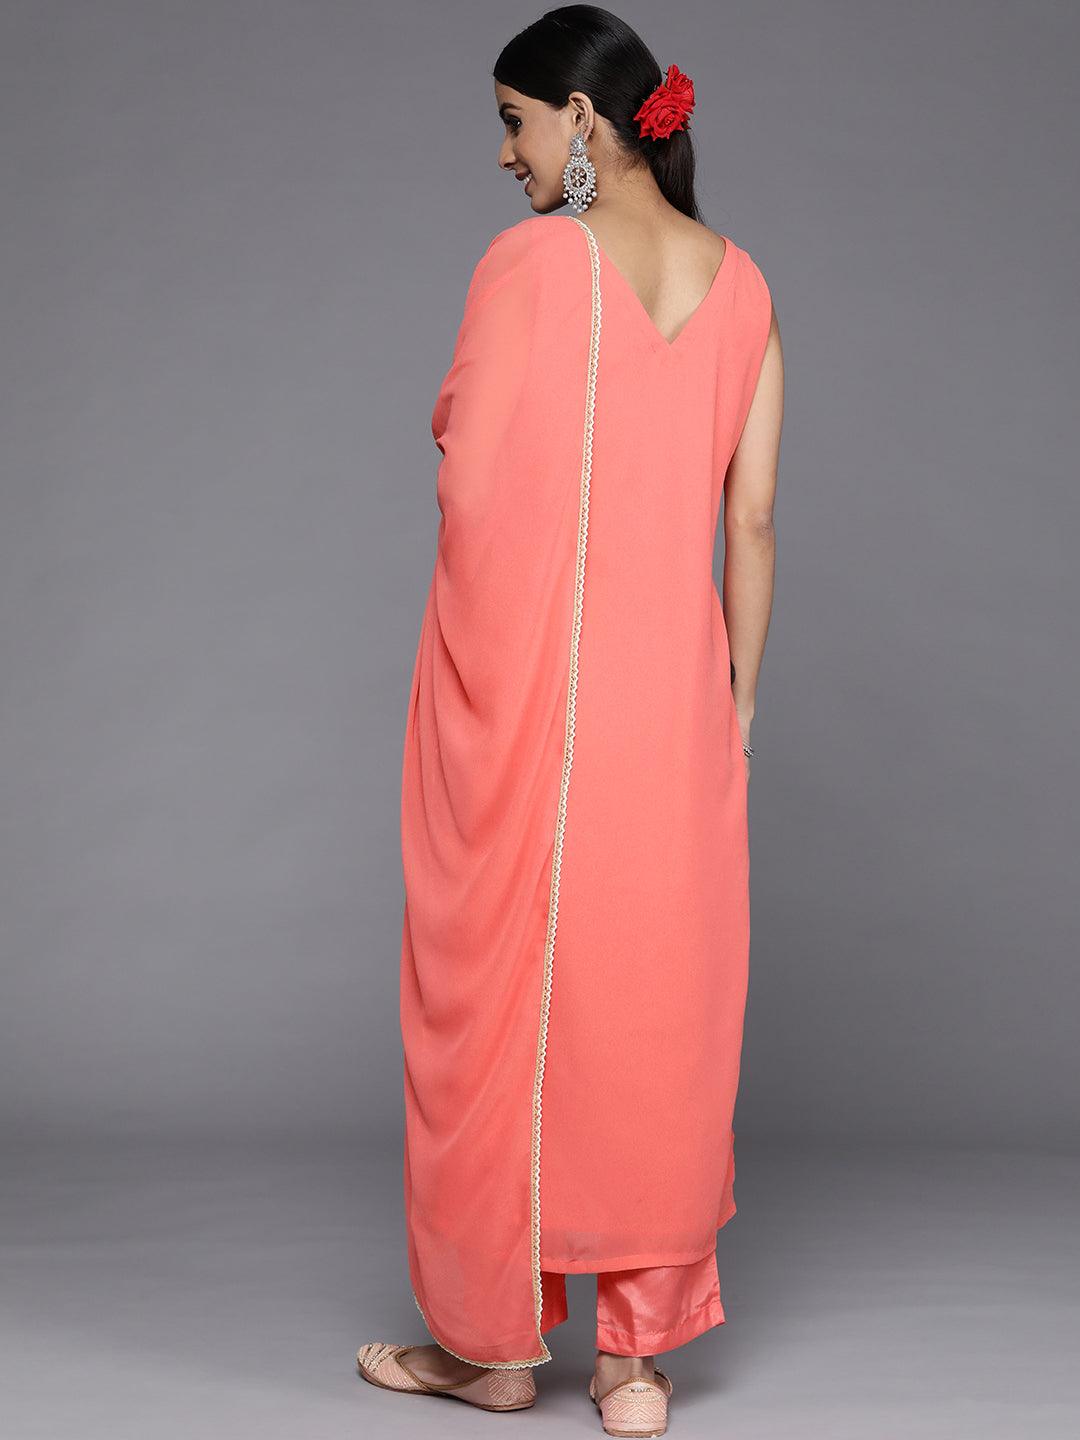 Coral Embroidered Georgette Straight Kurta With Dupatta